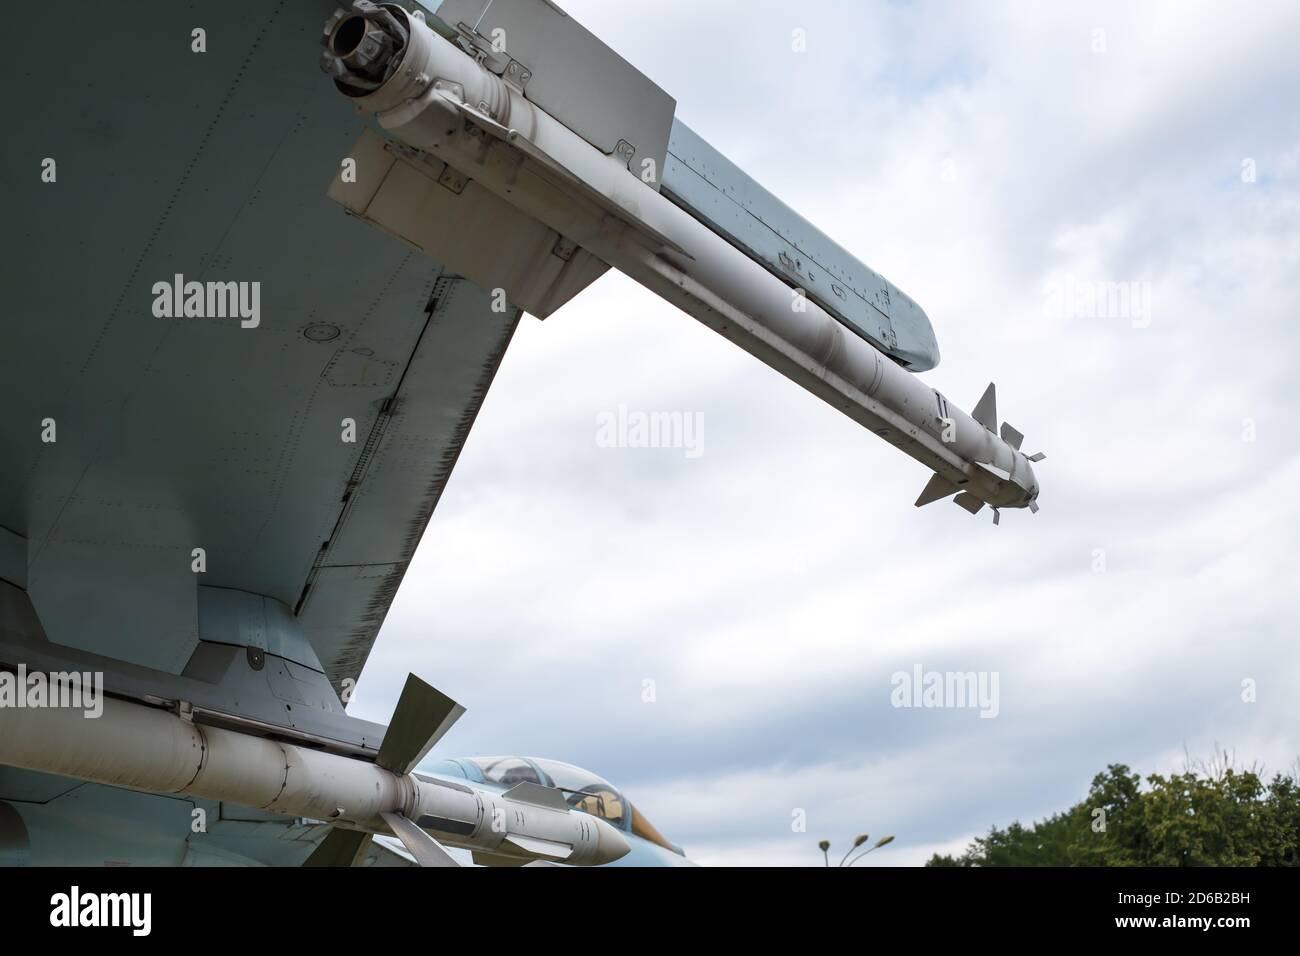 Two air-to-air missiles are suspended under the wing of the aircraft. Fragment of the plane Stock Photo